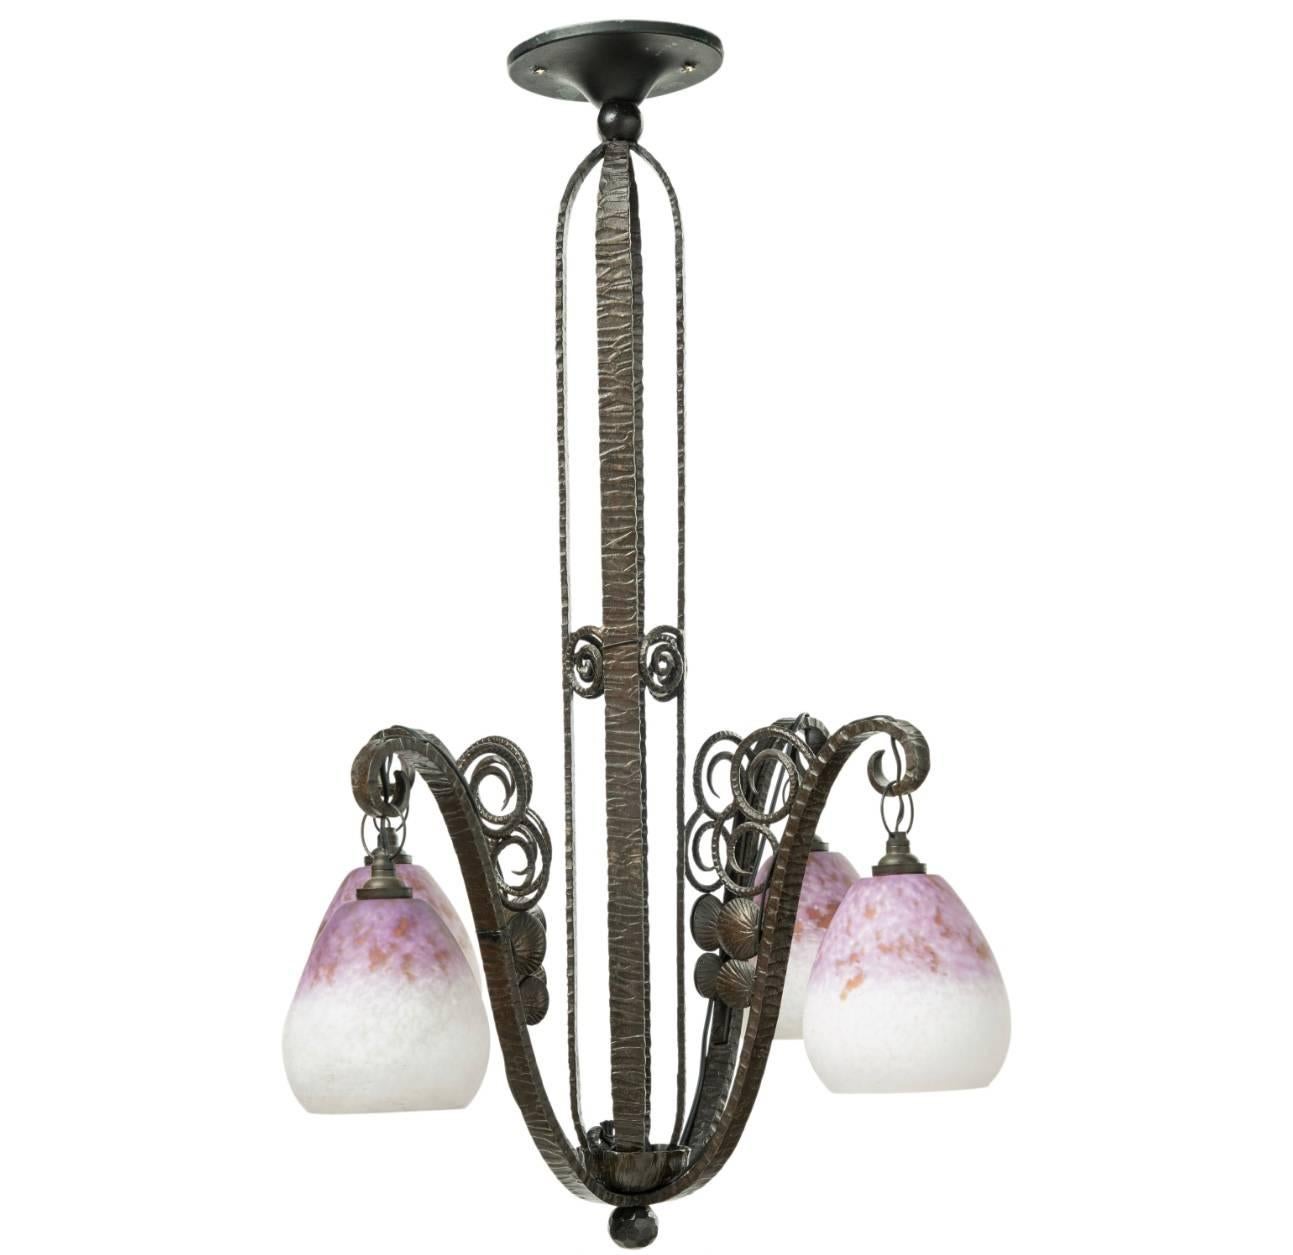 An Edgar Brandt style four light wrought iron chandelier with Daum Nancy glass shades each signed Daum Nancy with Cross of Lorraine. Shades are in pink, purple and cream variegated design. Art Nouveau - Art Deco French, circa 1930

Shades Engraved